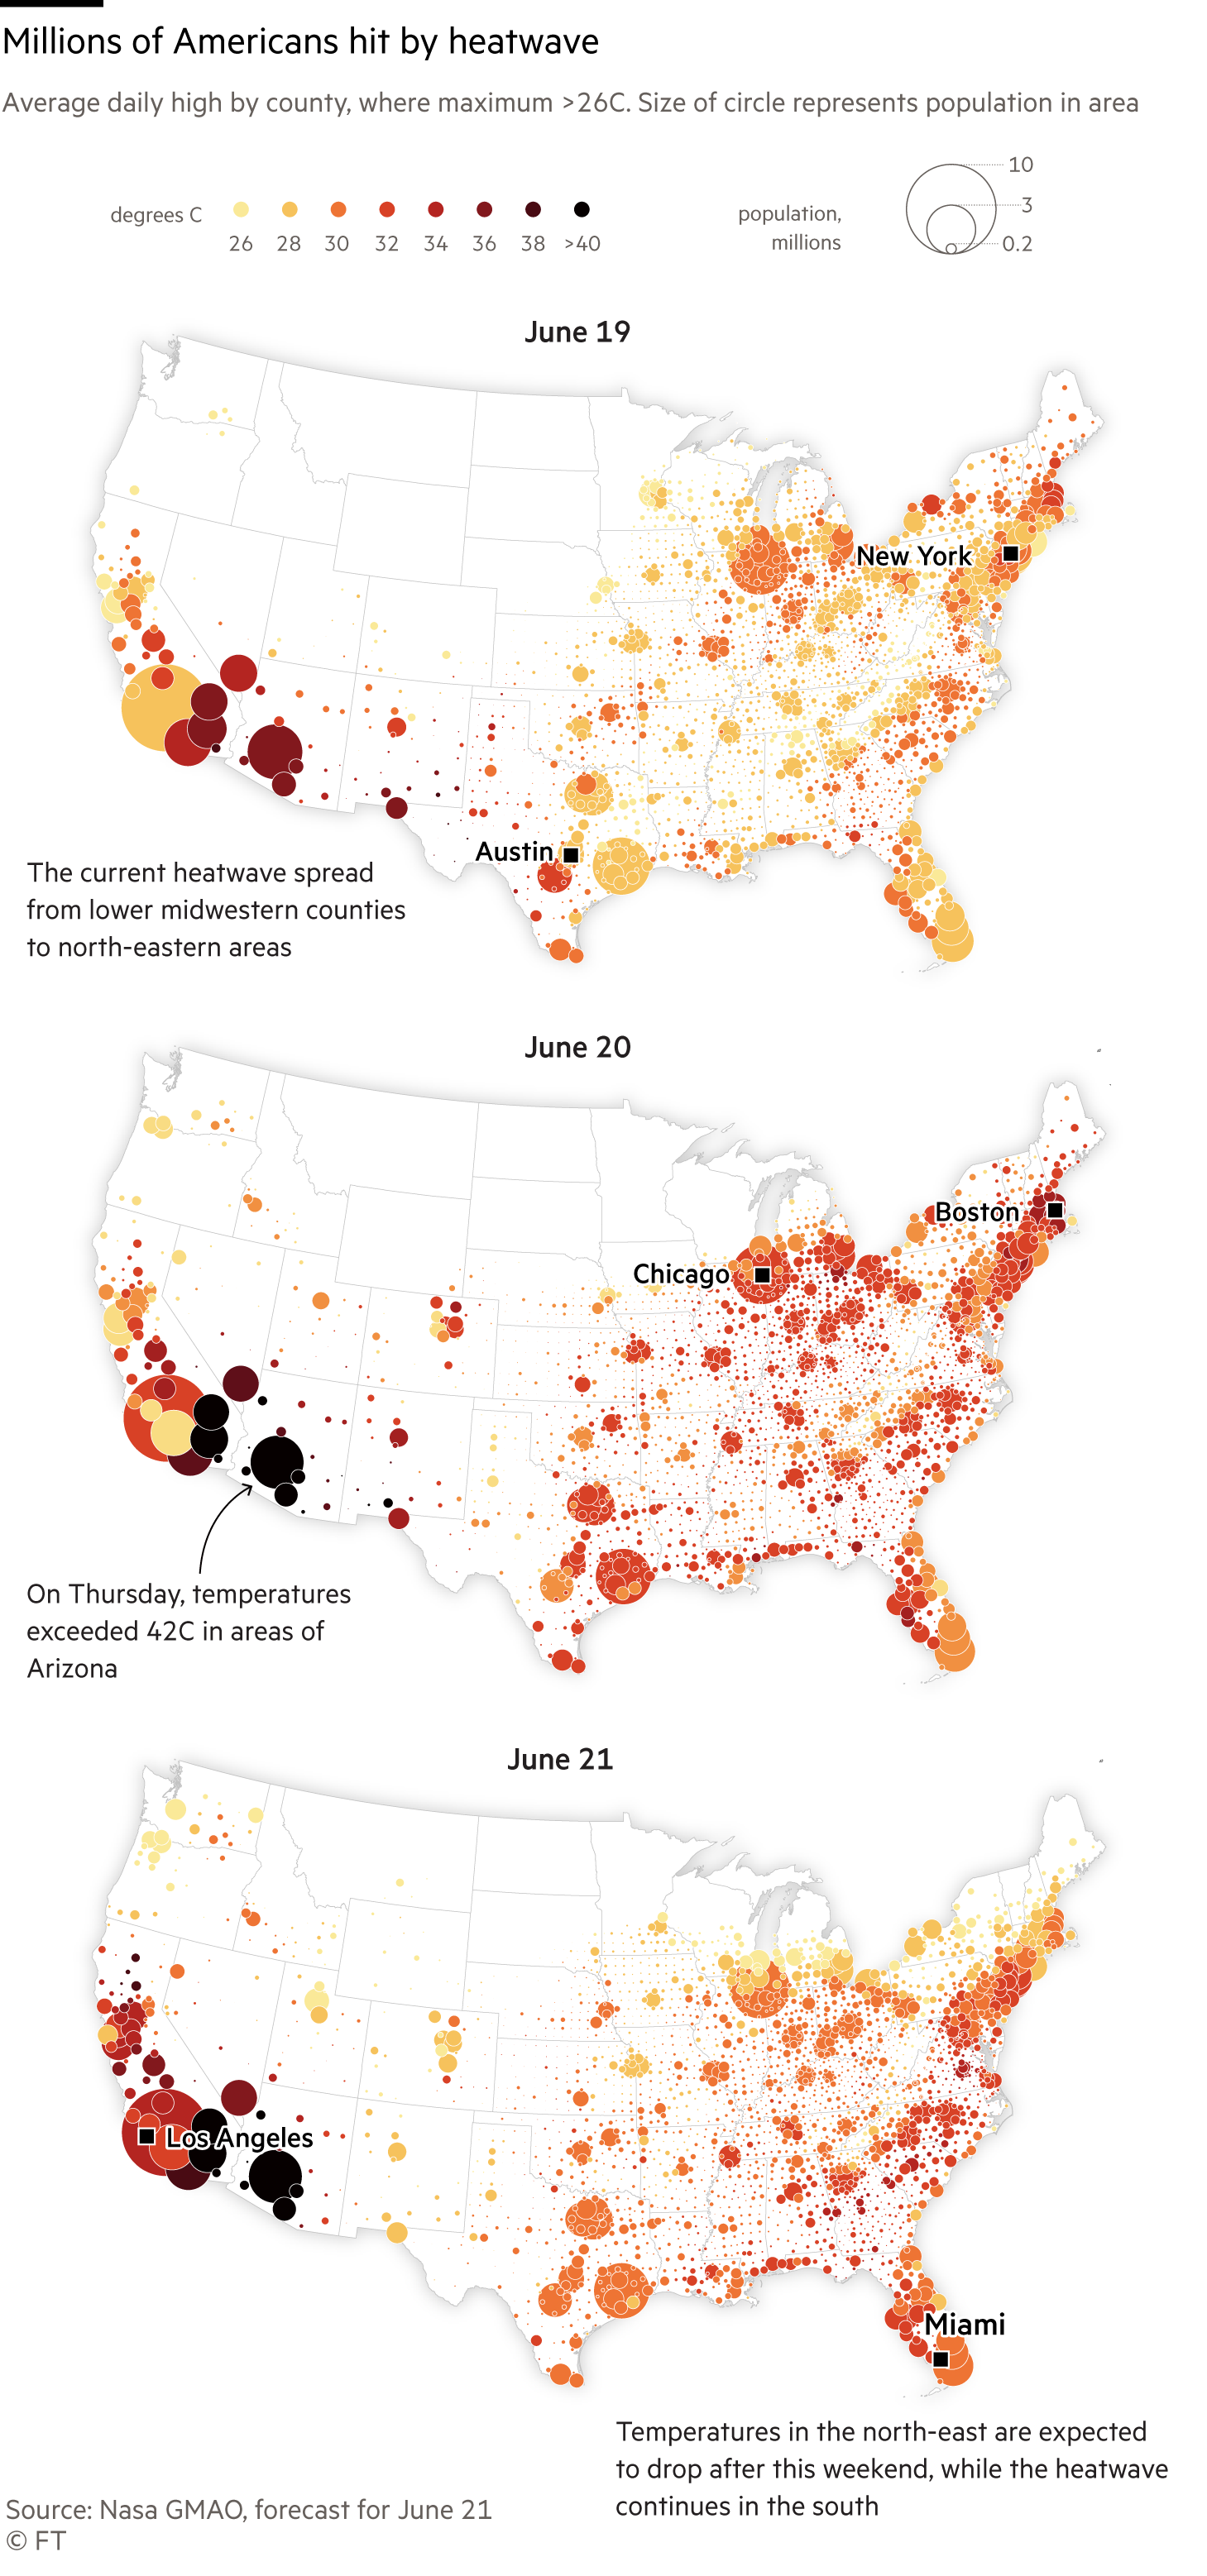 Small multiples map showing average daily highs by US counties, where the maximum exceeded 26C. Circles are sized by population per county, showing the millions of Americans hit by the current heatwave. Source: Nasa GMAO